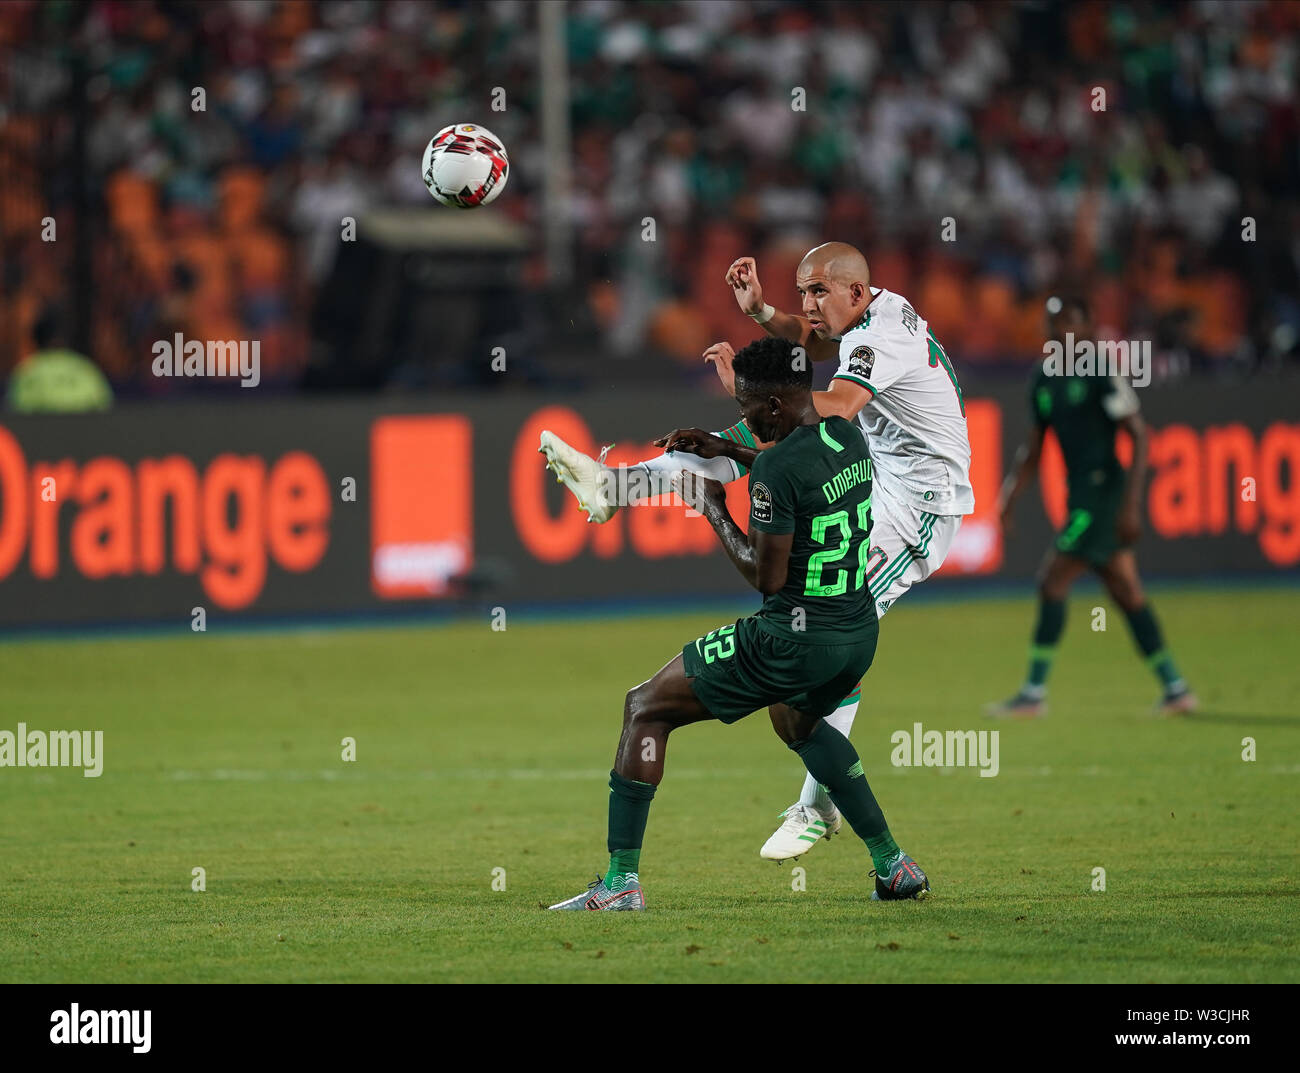 Cairo, Algeria, Egypt. 14th July, 2019. FRANCE OUT July 14, 2019: Sofiane Feghouli of Algeria passing the ball in front of Kenneth Josiah omeruo of Nigeria during the 2019 African Cup of Nations match between Algeria and Nigeria at the Cairo International Stadium in Cairo, Egypt. Ulrik Pedersen/CSM/Alamy Live News Stock Photo